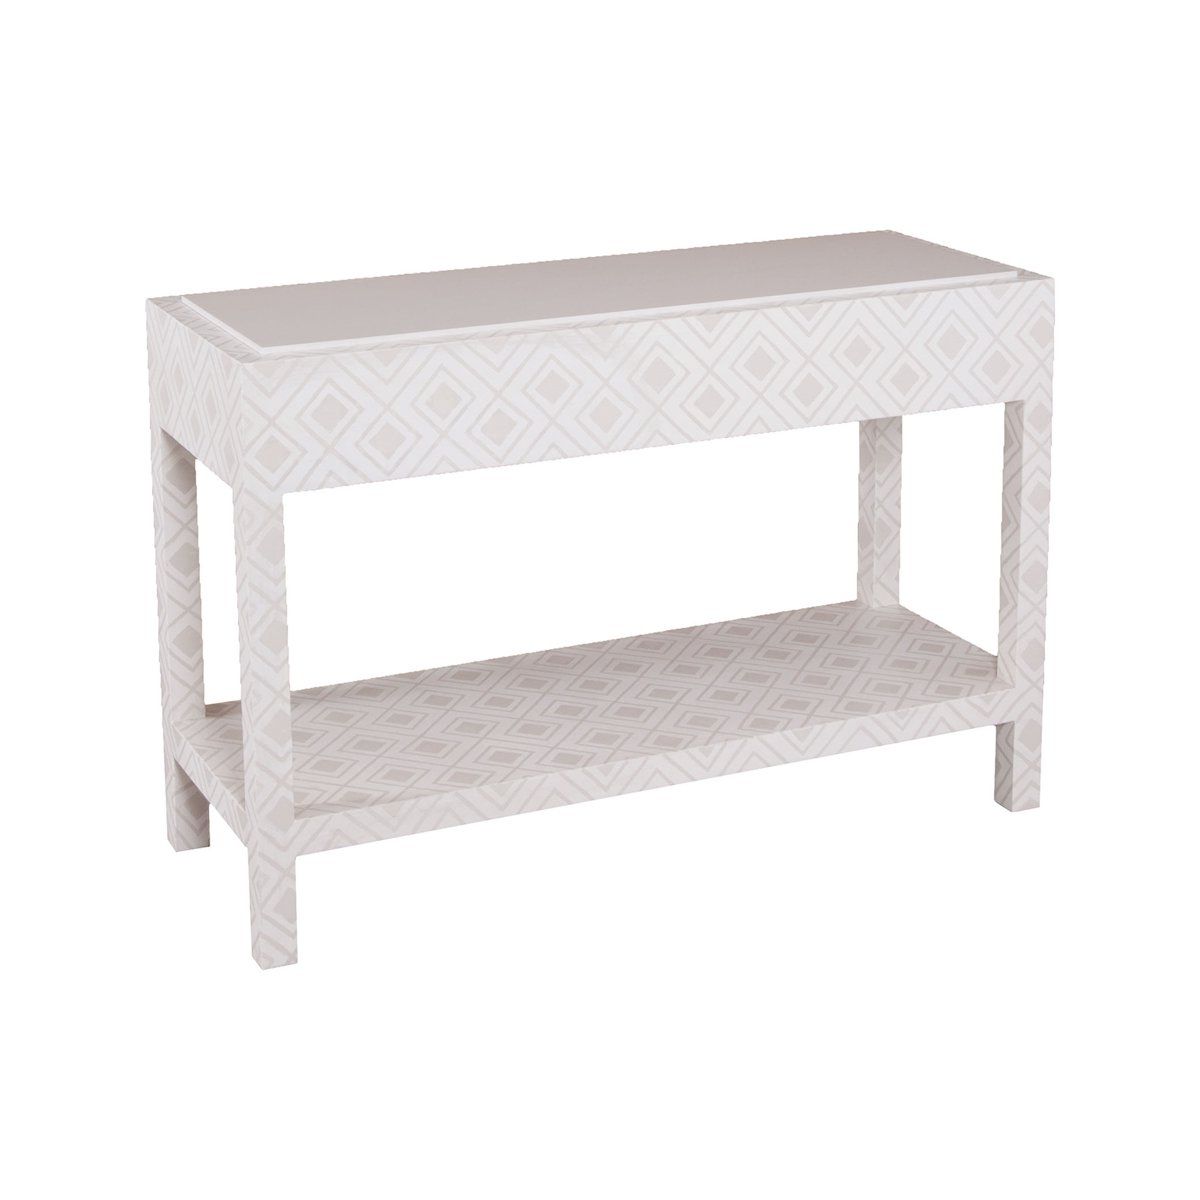 Kent Fabric Wrapped Console | Products In 2018 | Pinterest With Parsons Concrete Top & Elm Base 48x16 Console Tables (View 18 of 20)